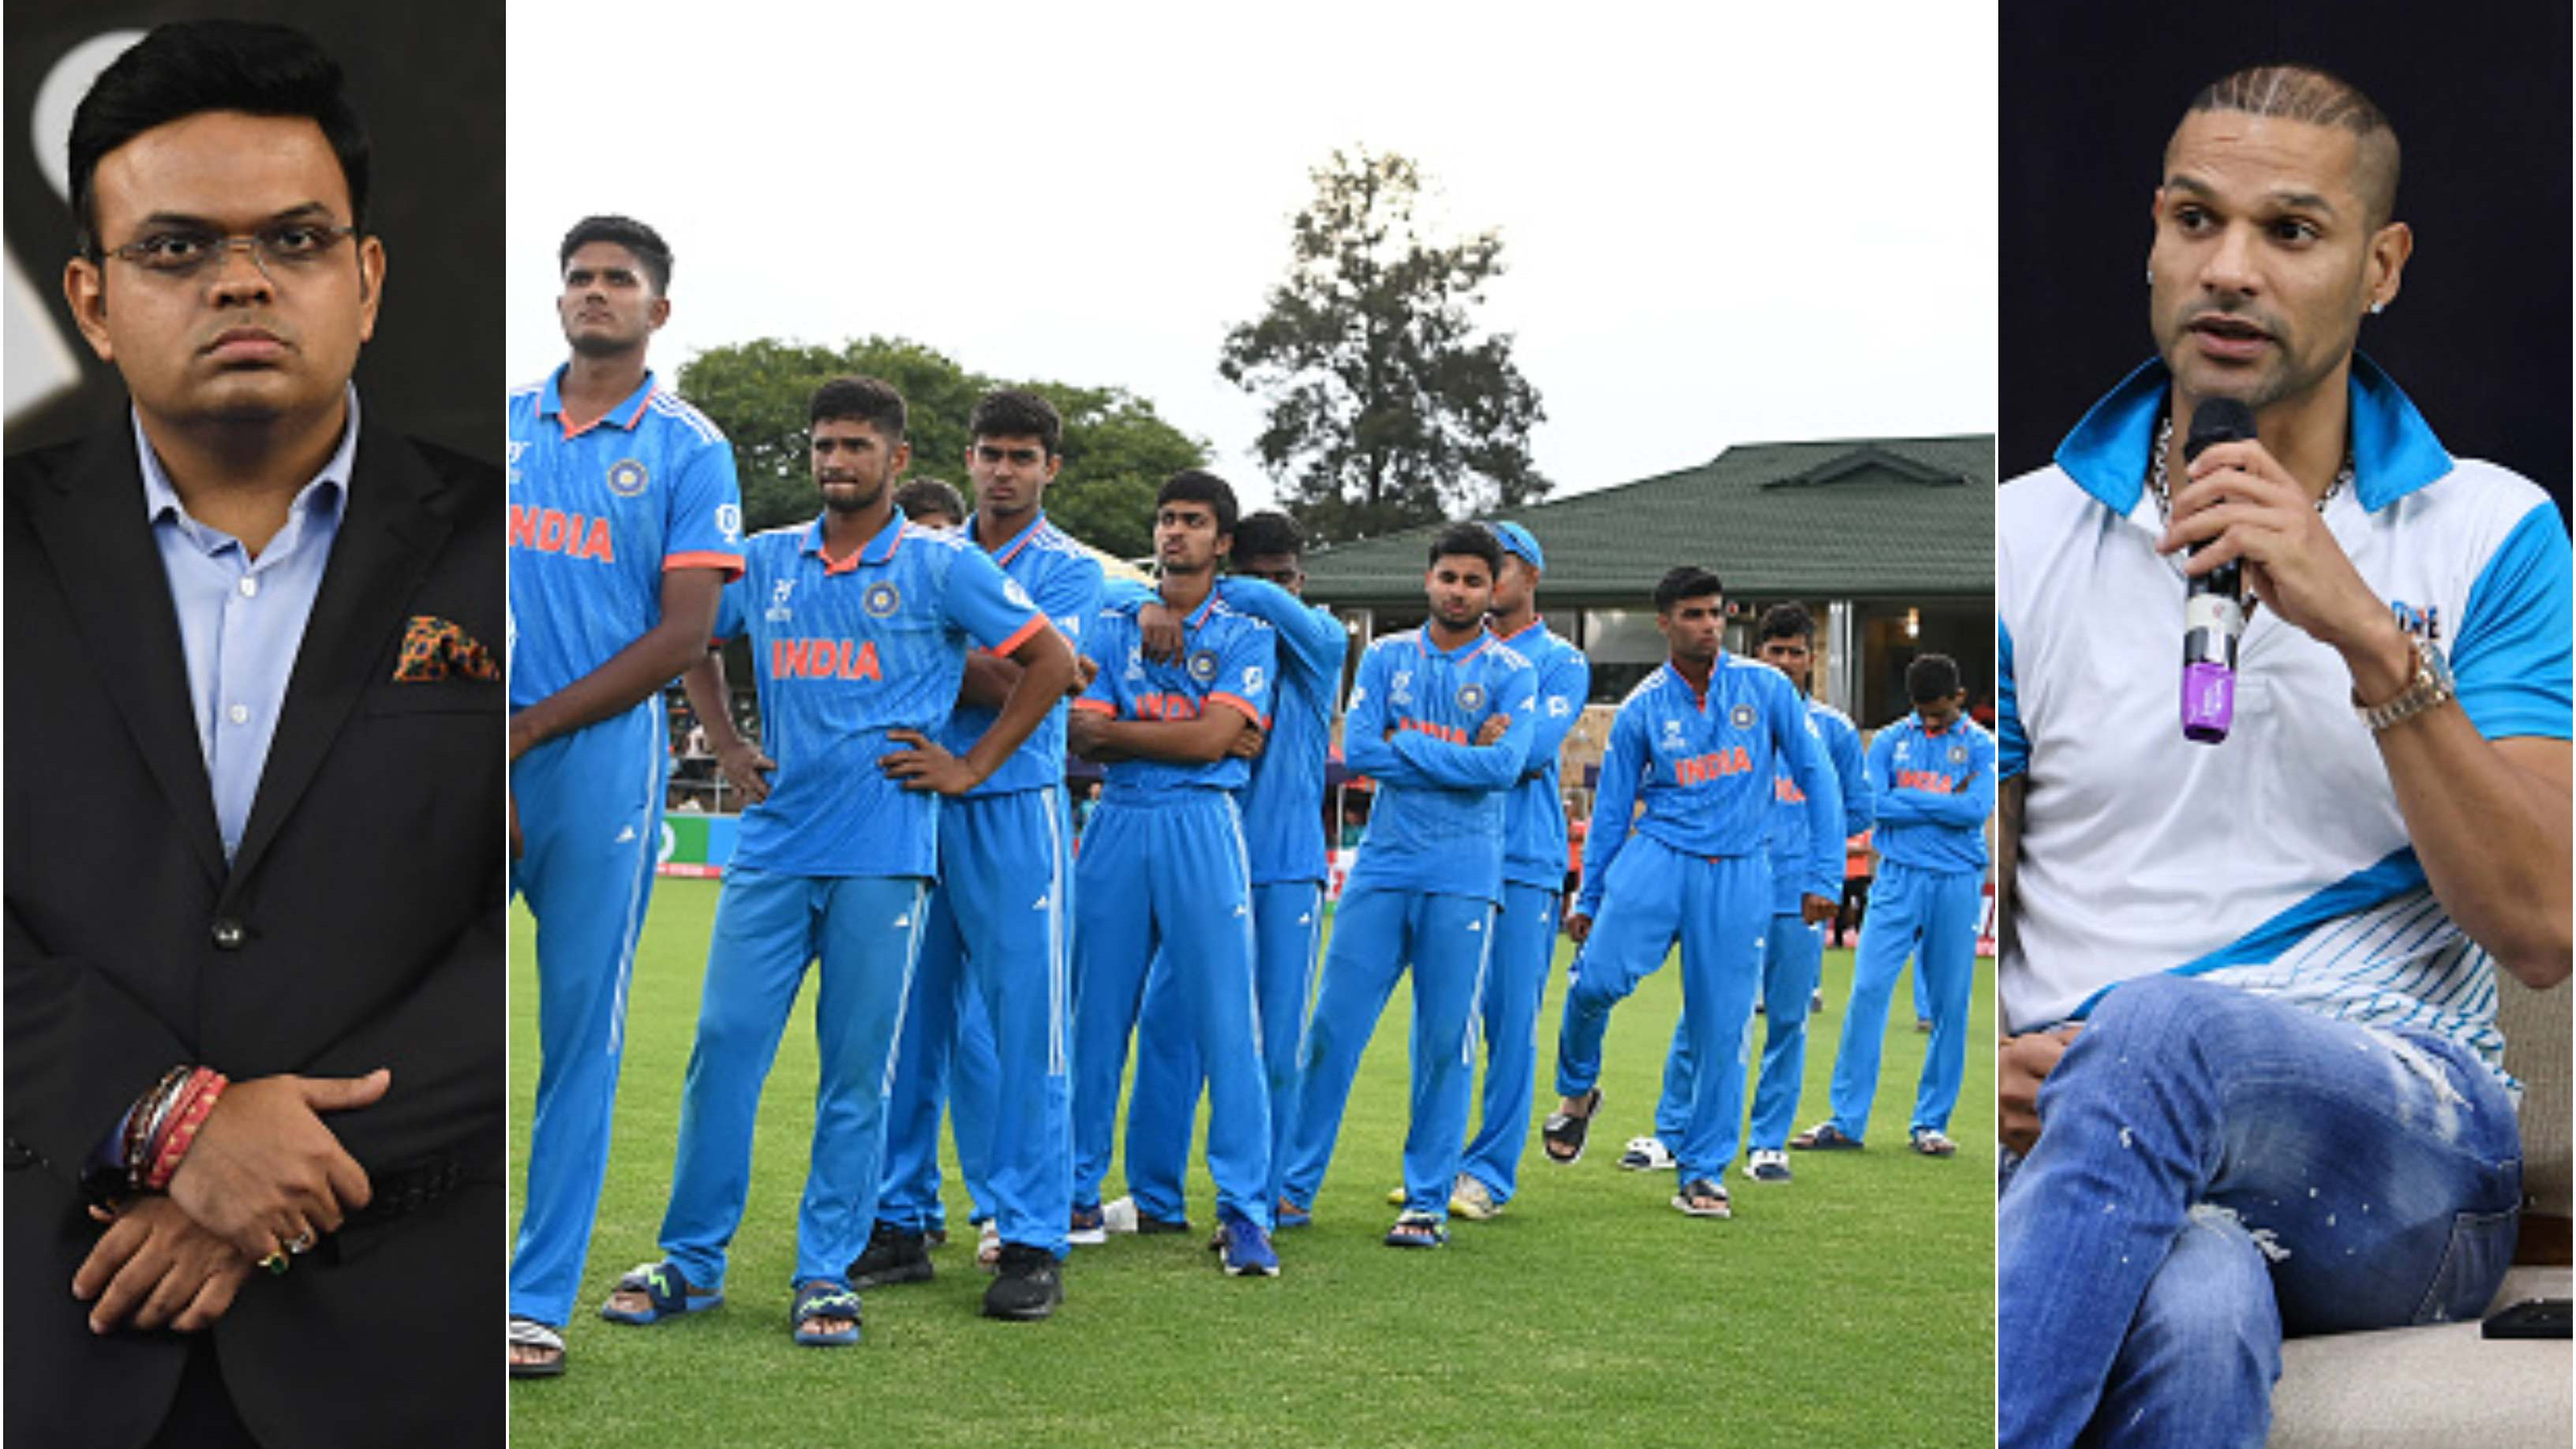 Indian cricket fraternity lauds India U-19 team despite loss to Australia in Youth World Cup final